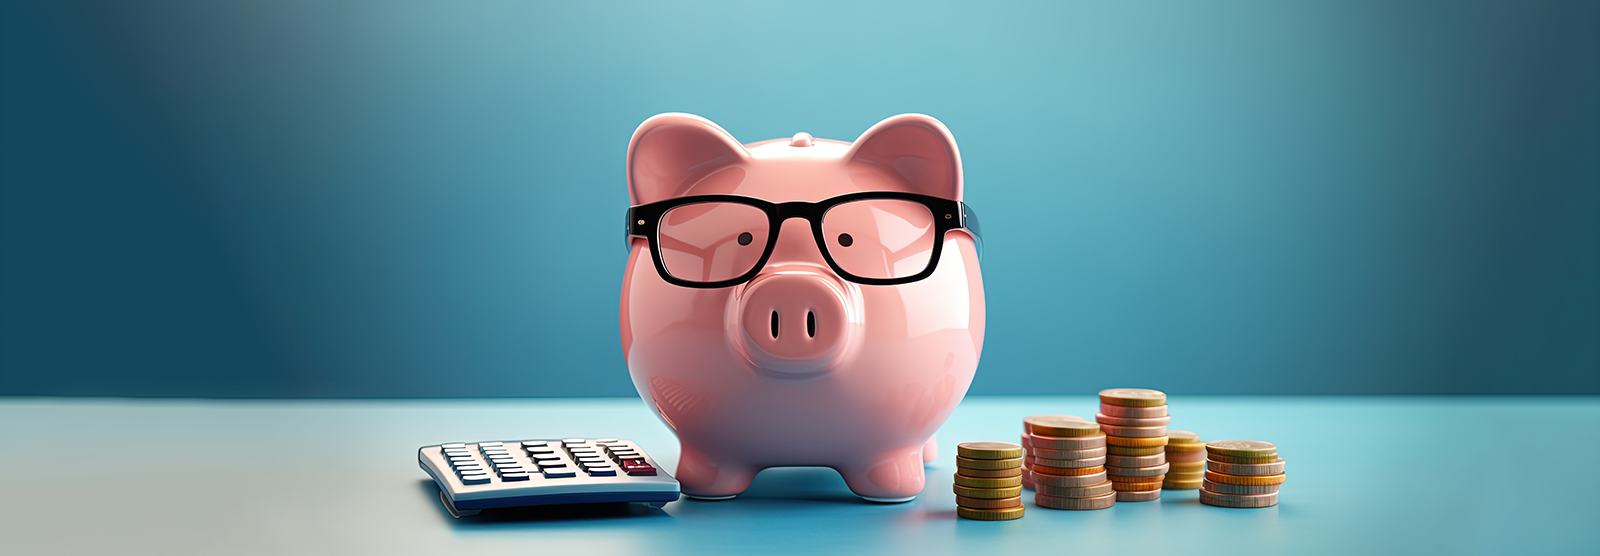 Piggy bank wearing glasses with calculator and coins.